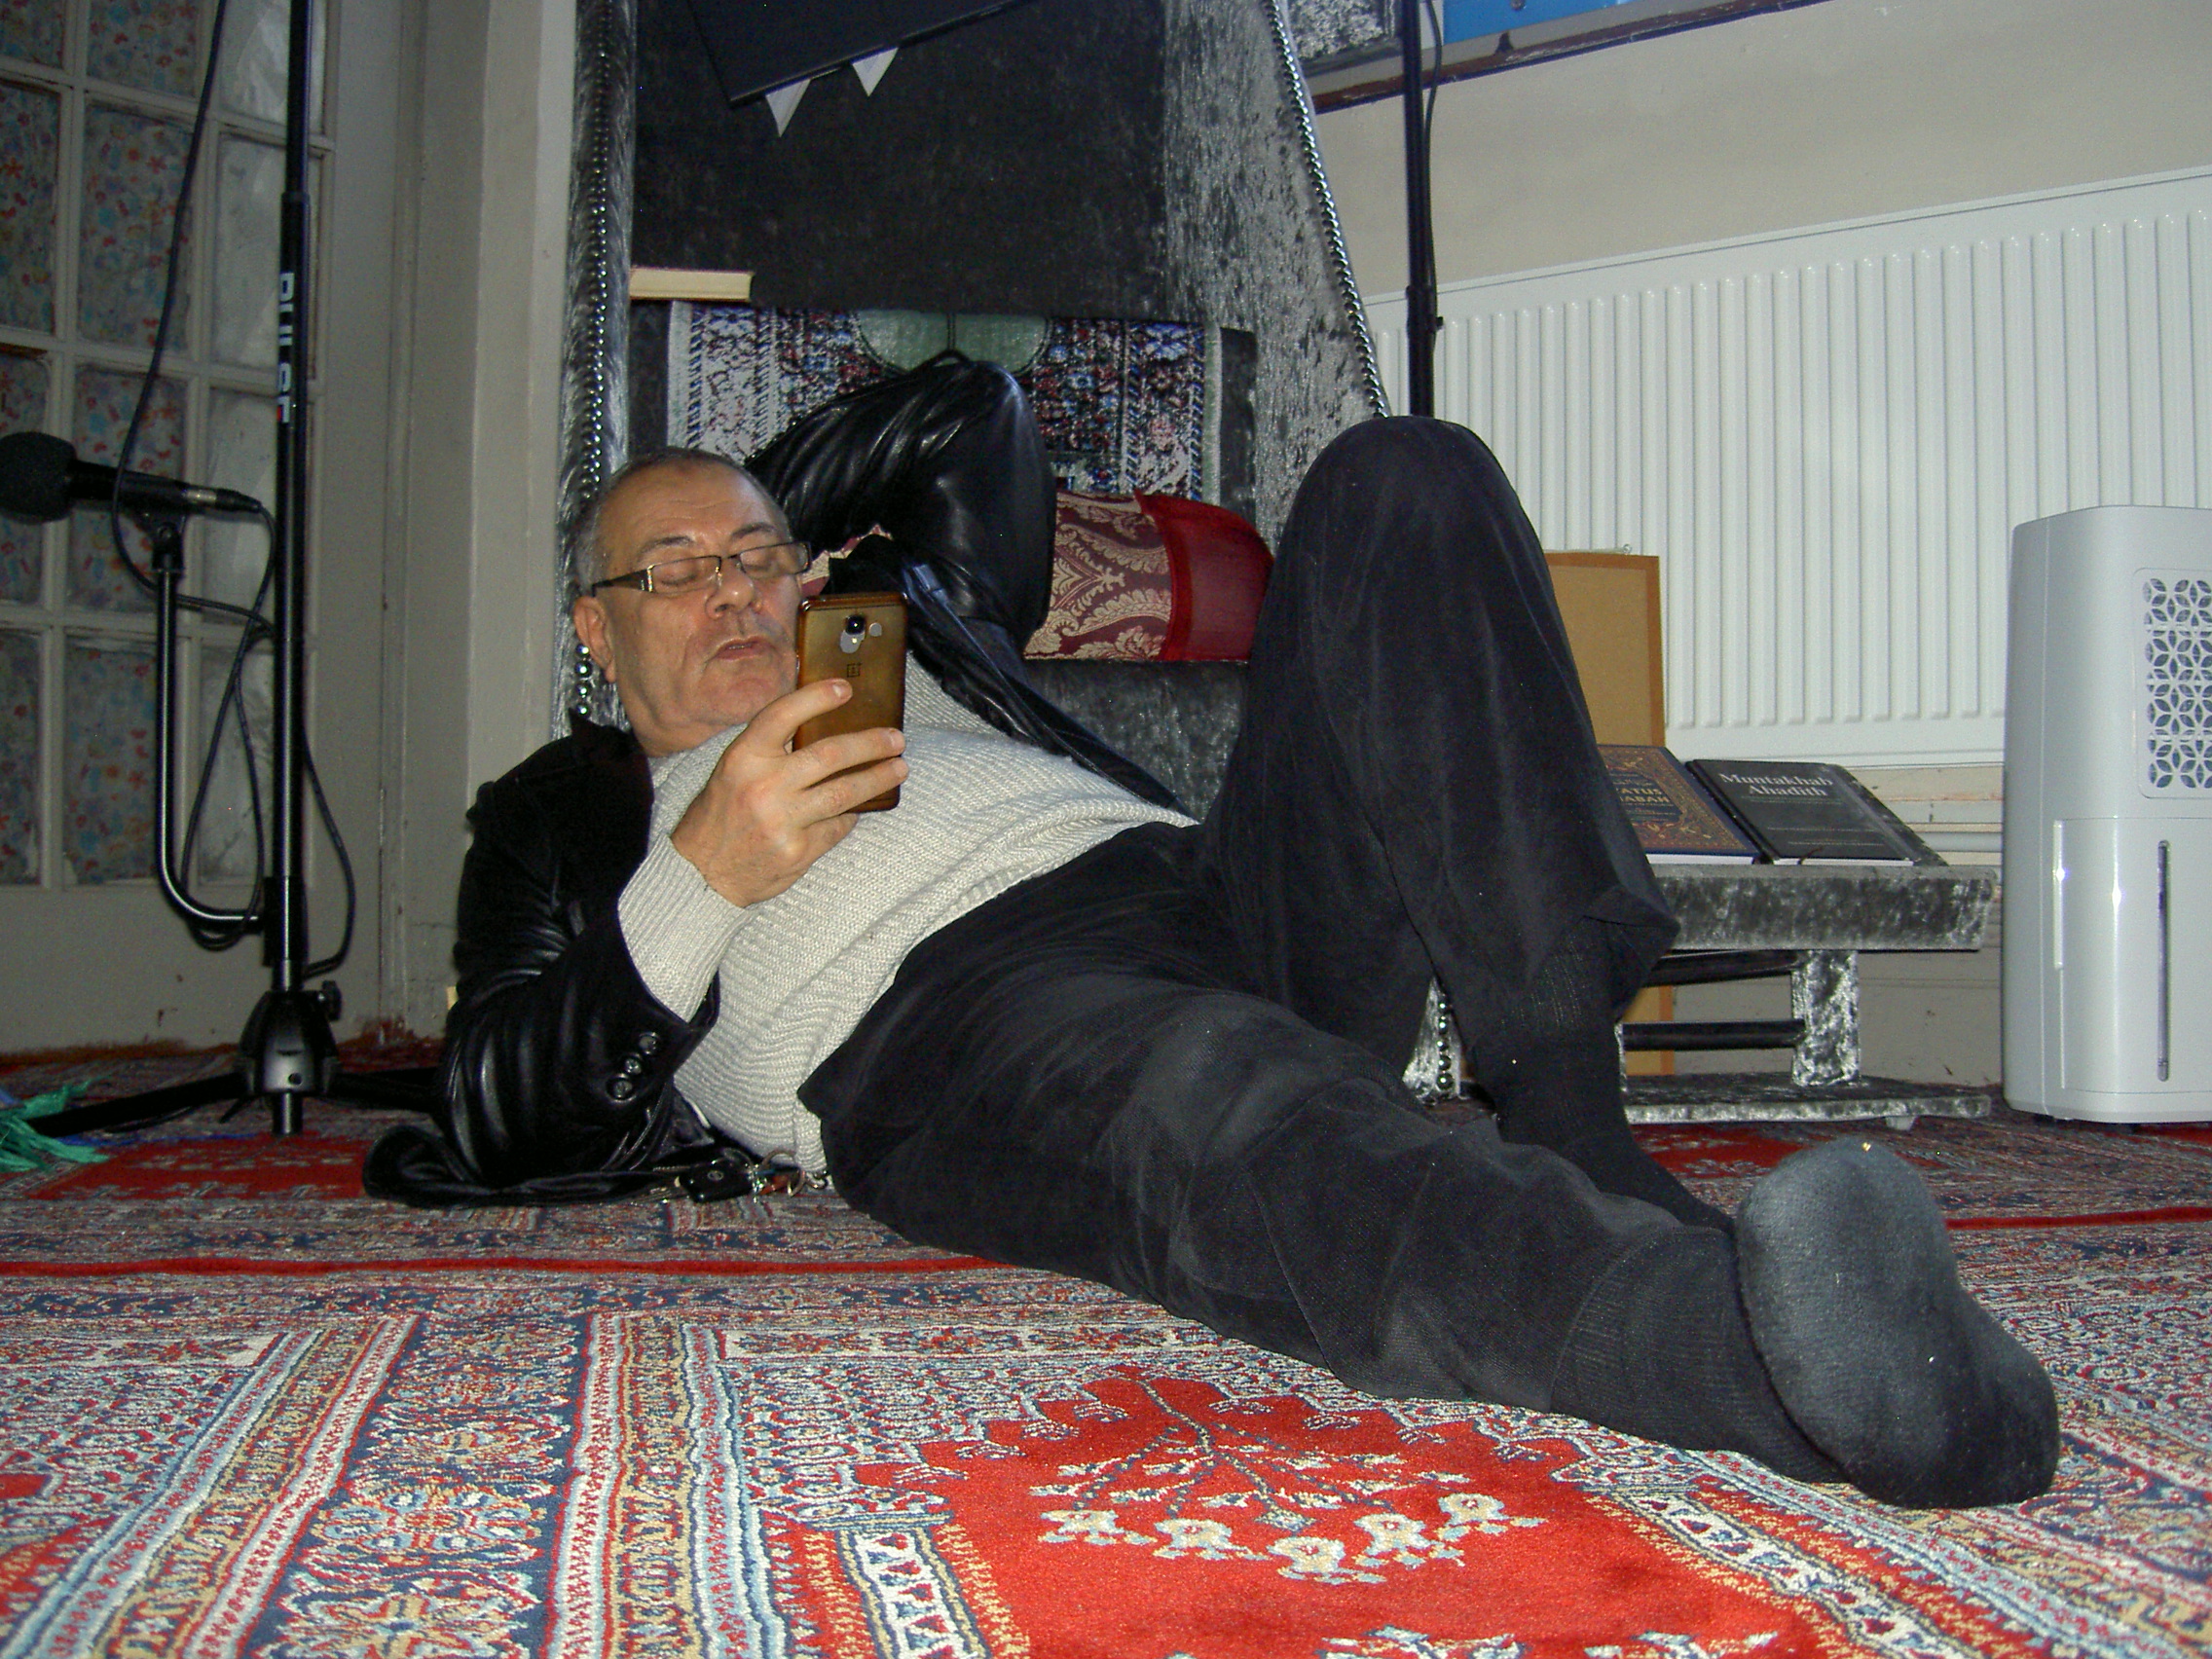 Man lying on the floor looking at his phone